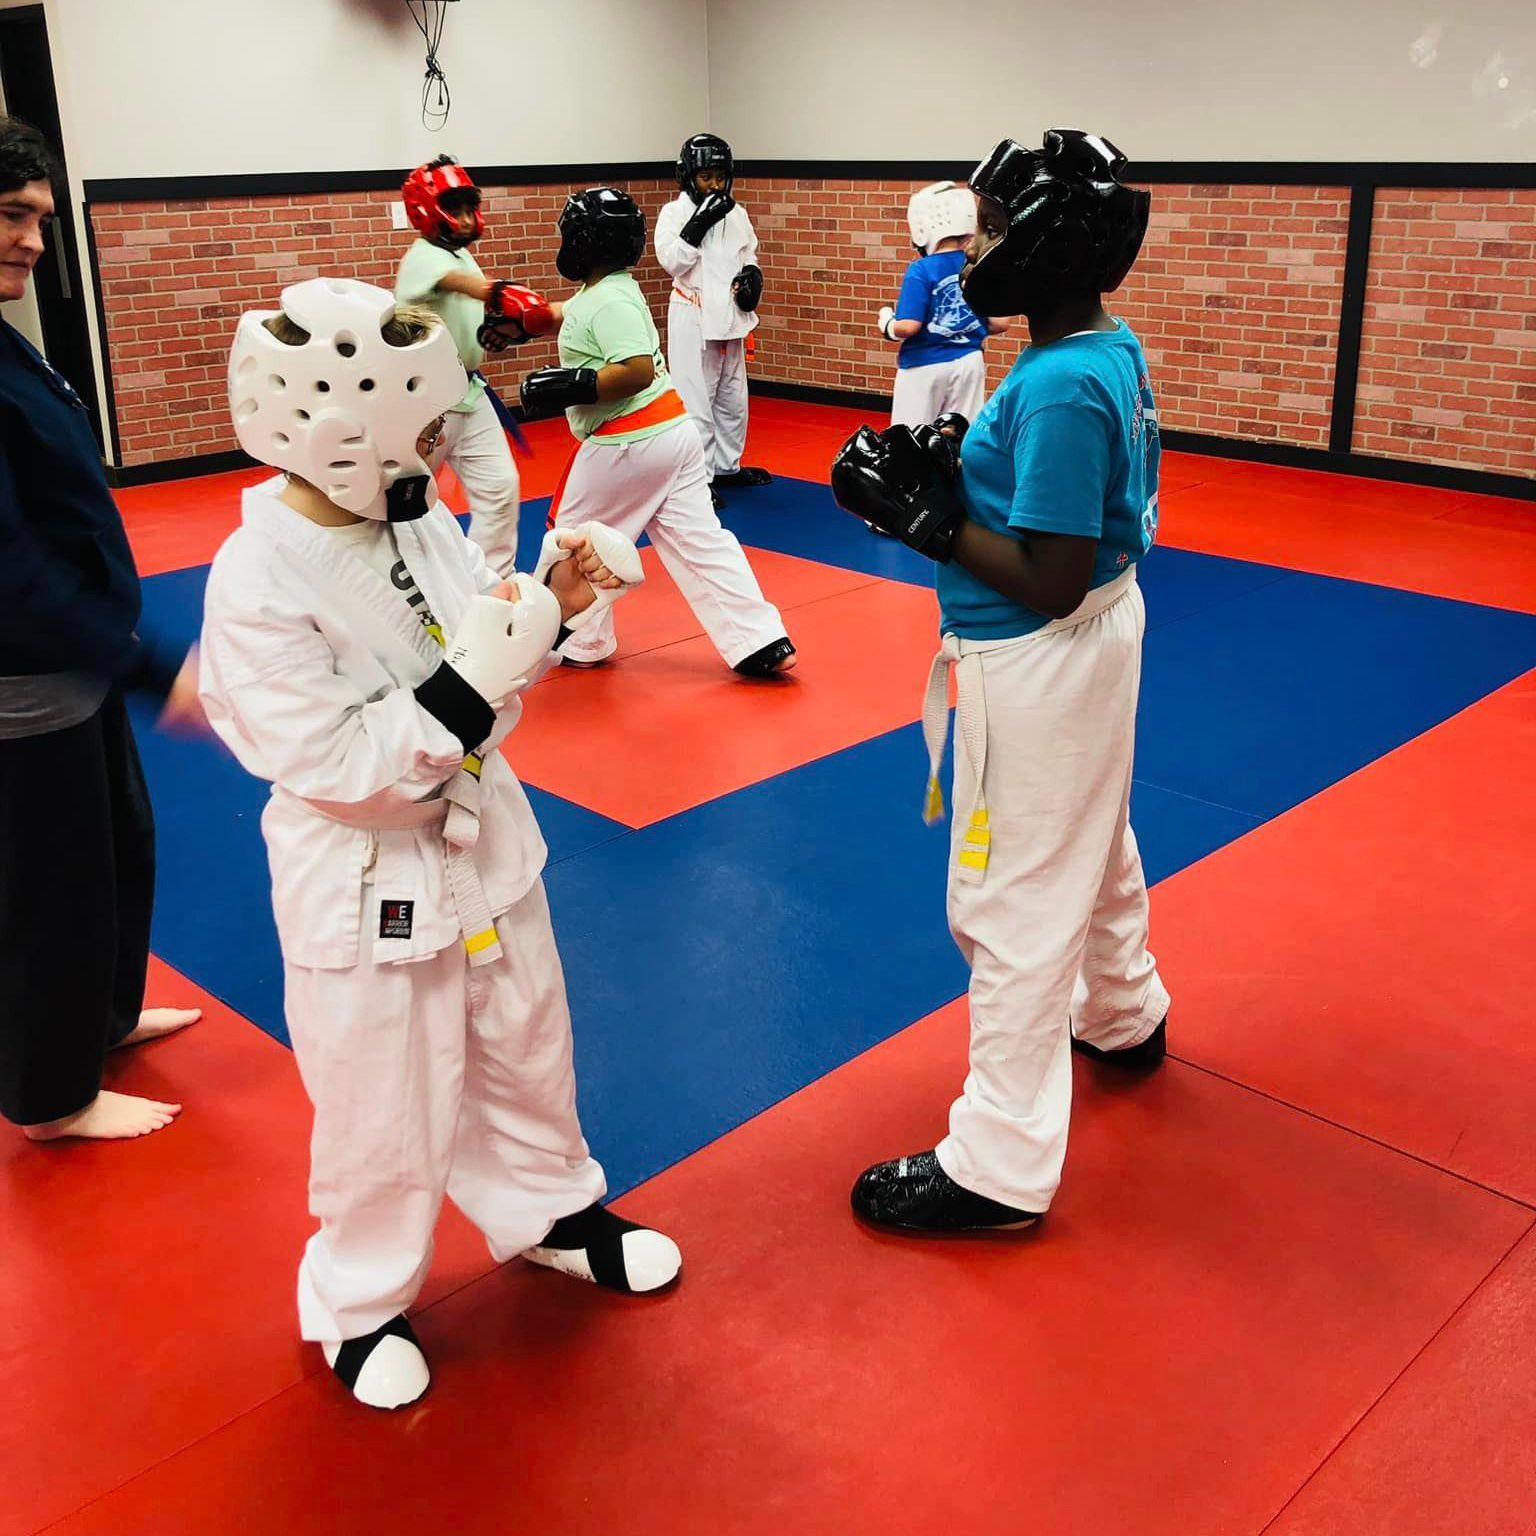 a group of children are practicing karate in a gym .